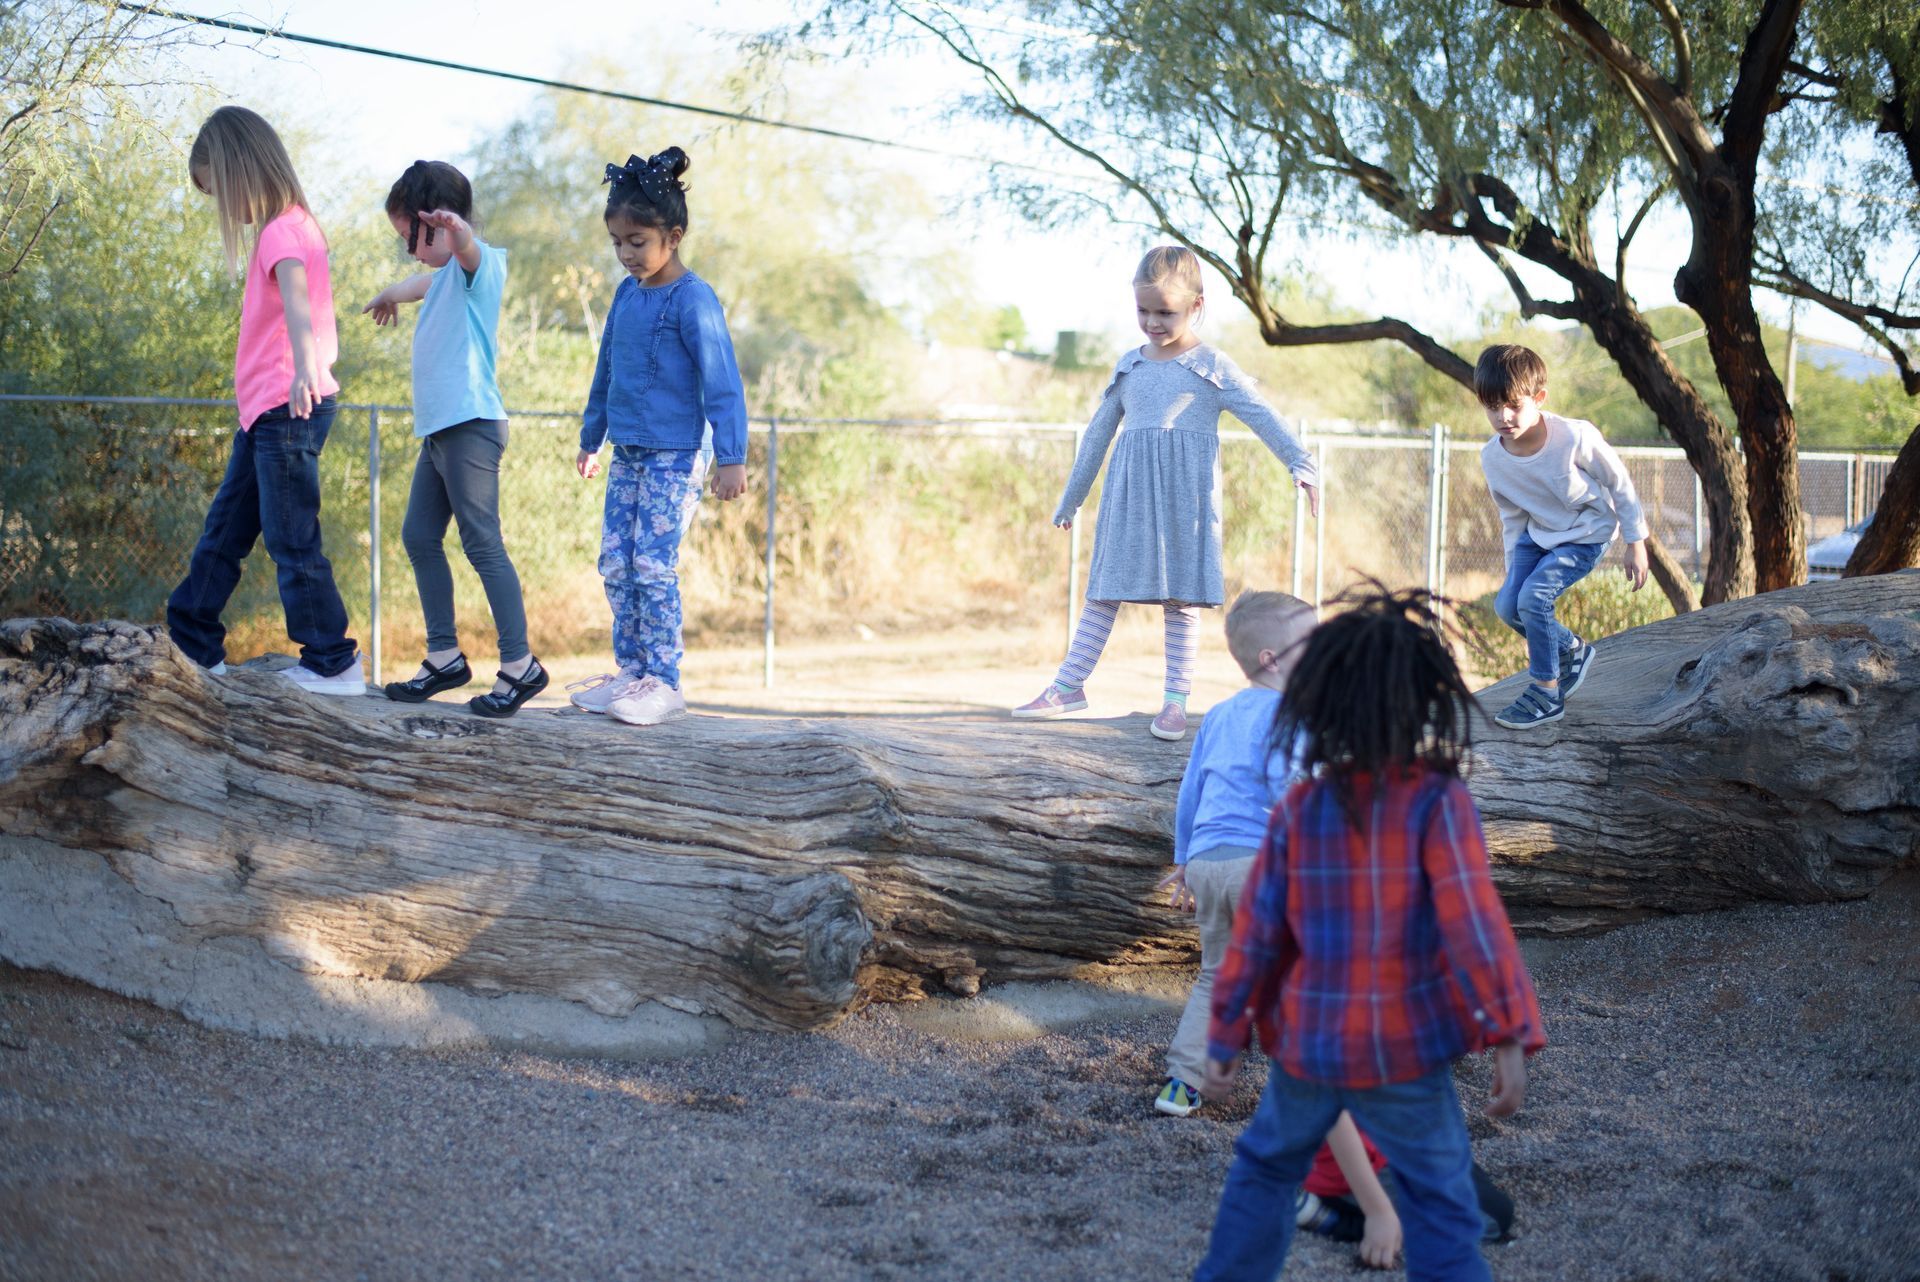 A group of montessori children are playing on a log in a playground.